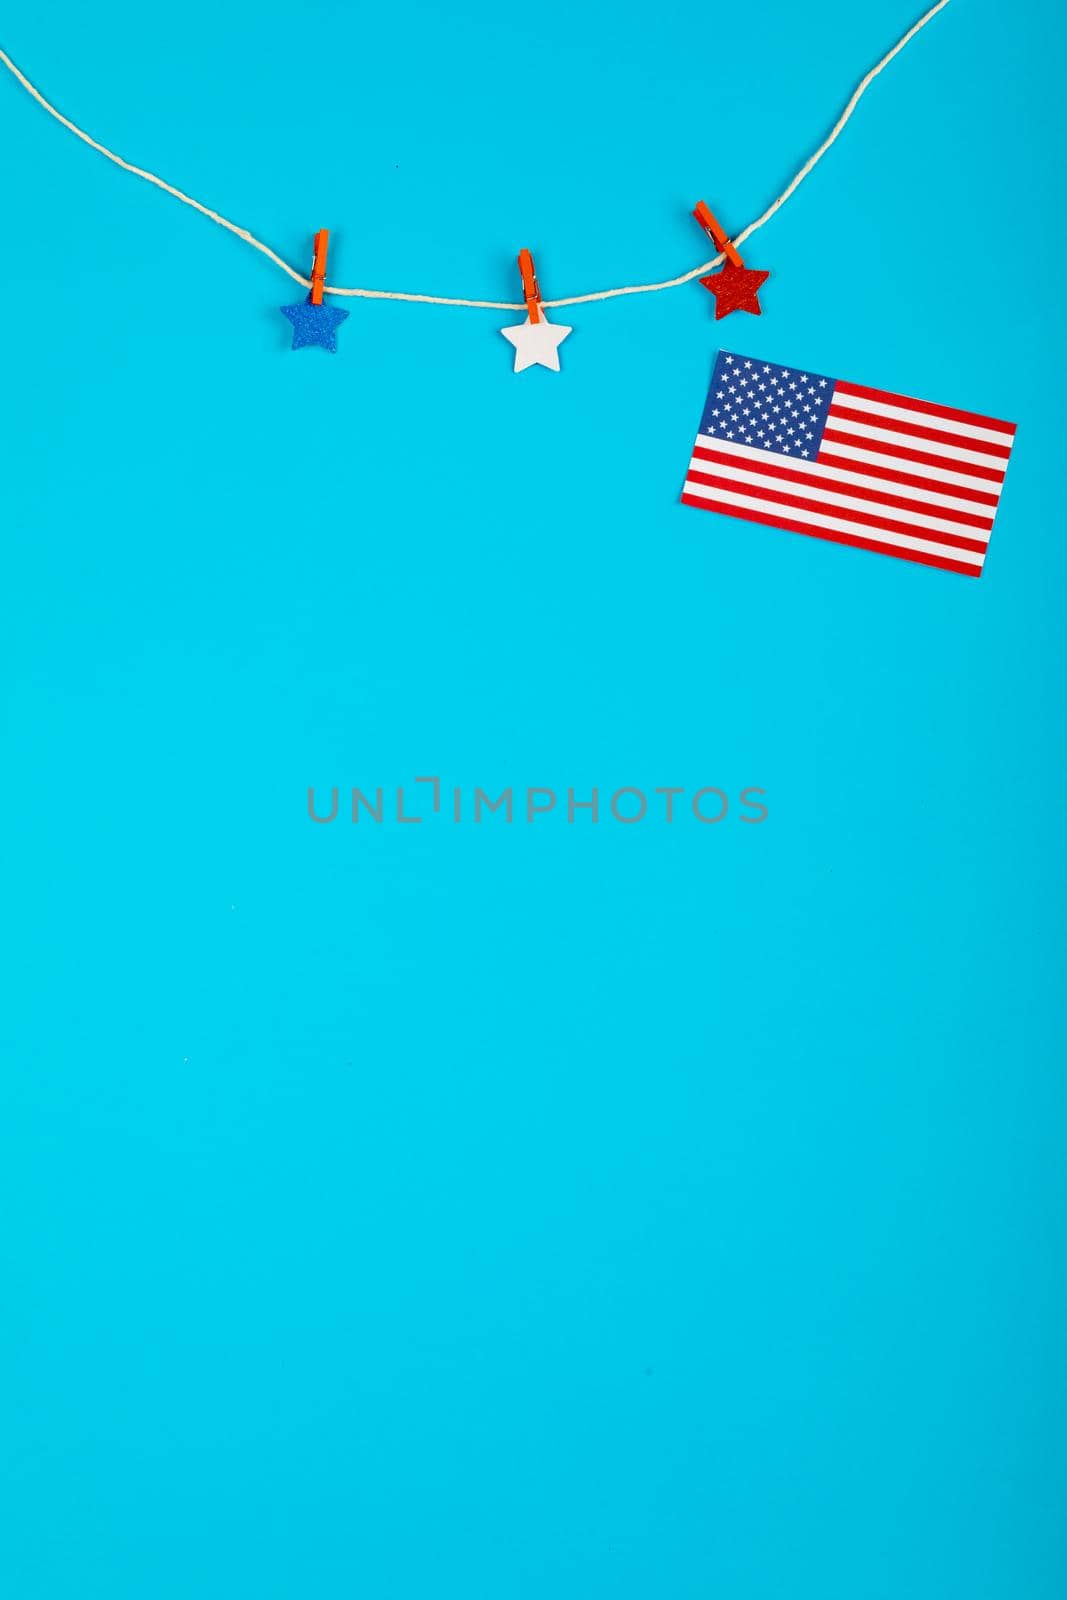 Clothespin with stars and detached usa flag hanging from string over blue background with copy space. patriotism, symbol and identity.